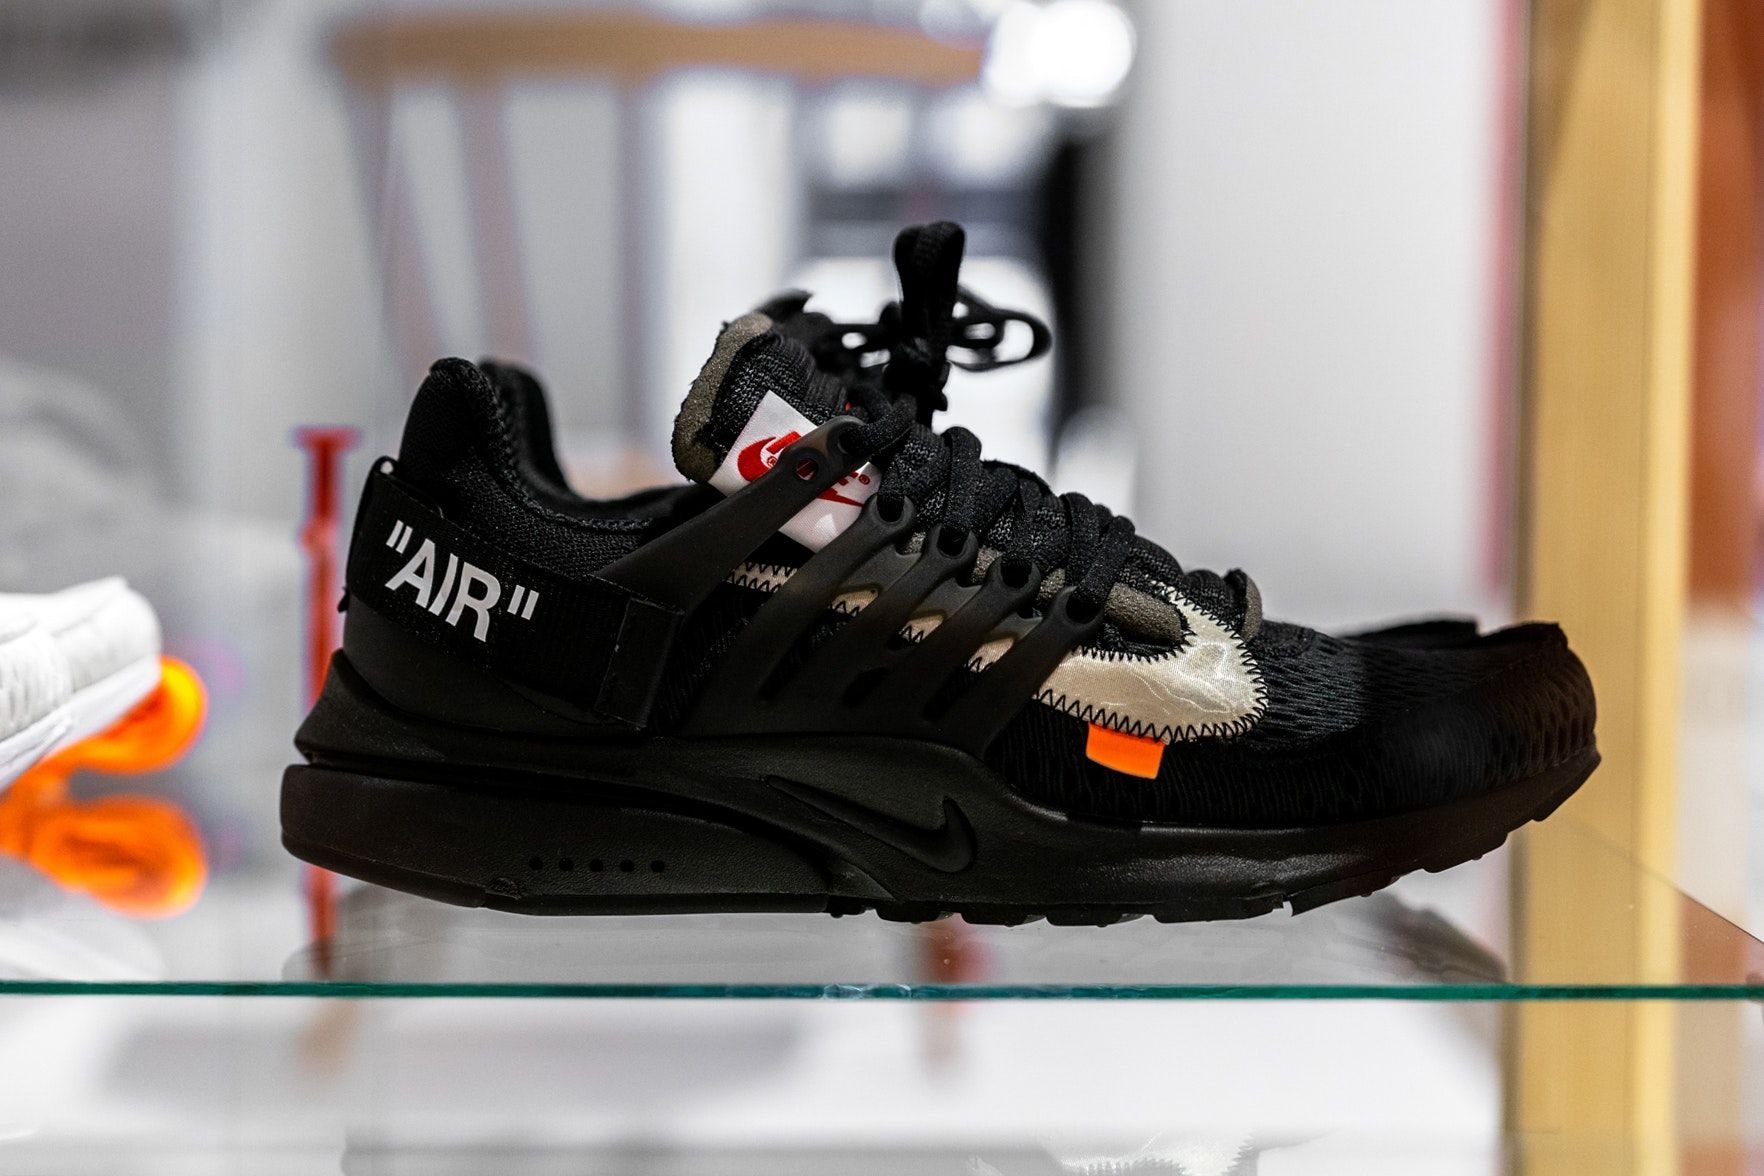 In-hand look // Off-White x Nike Air Presto "Black" | HOUSE OF HEAT